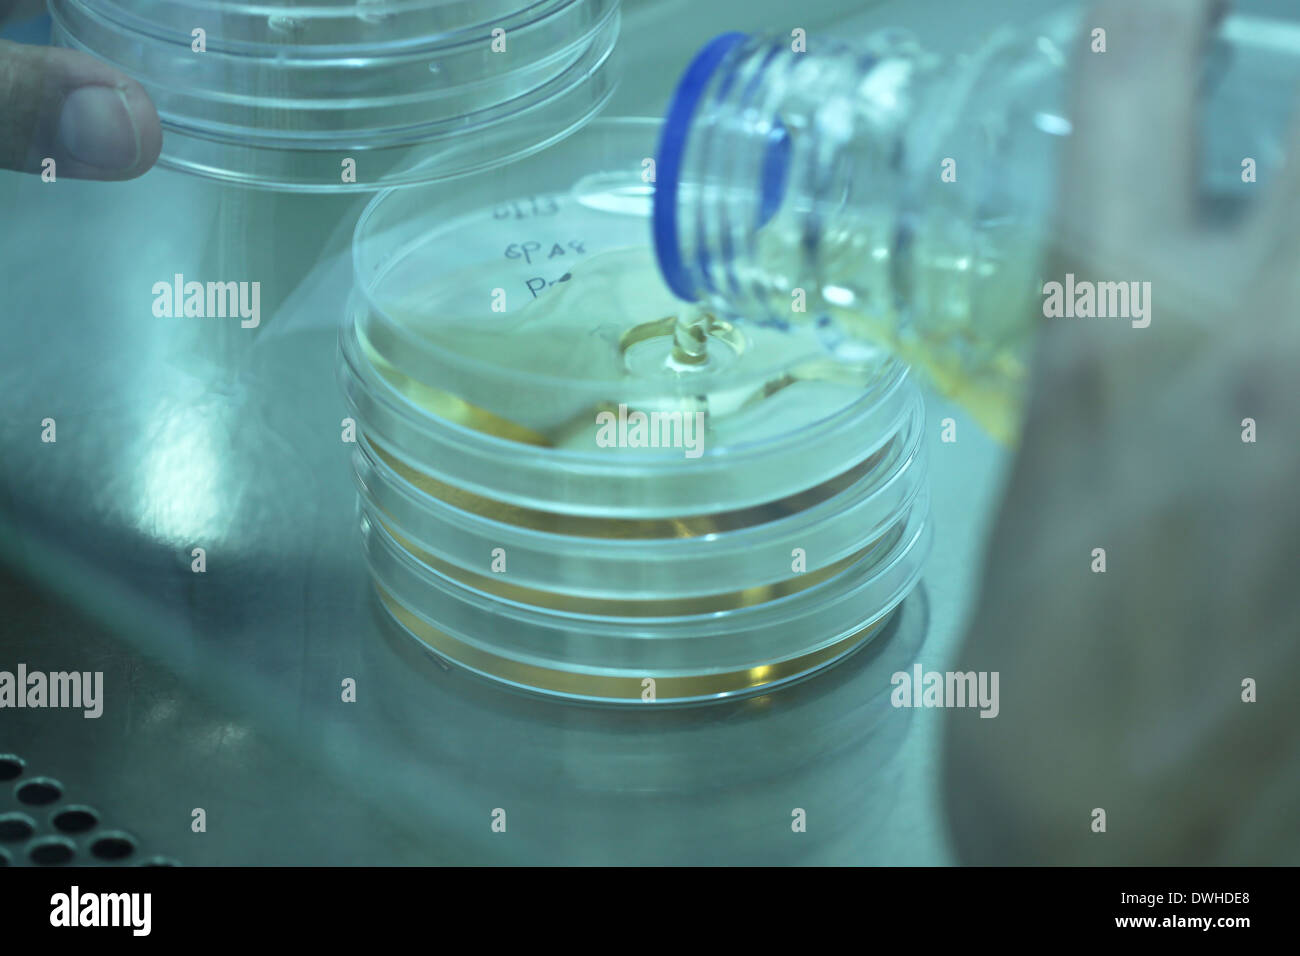 Adding agar fluid from bottle to test tubes in laboratory. Stock Photo